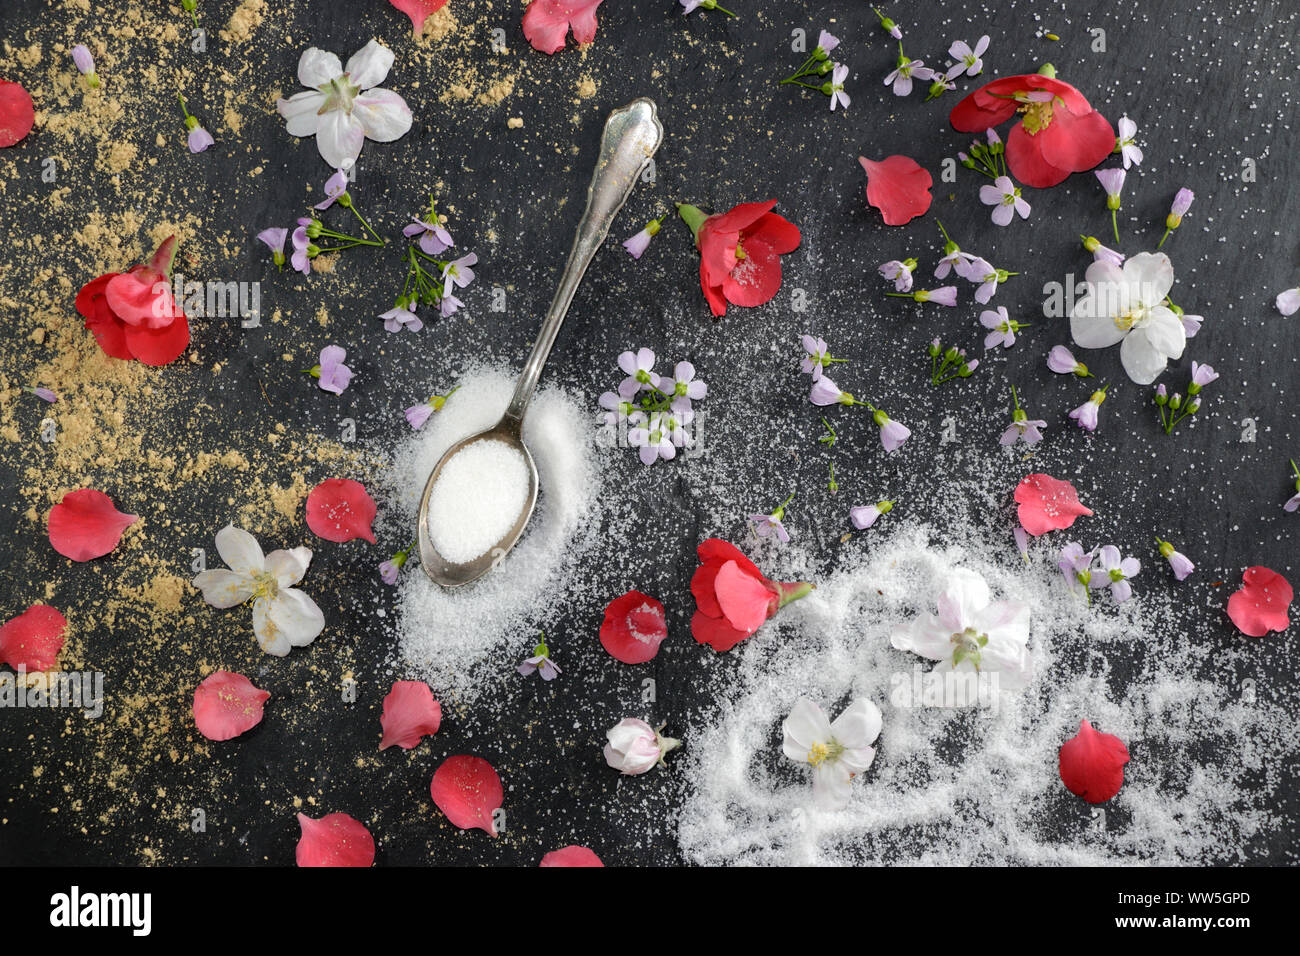 Arrangement with old silver spoon and blossoms Stock Photo